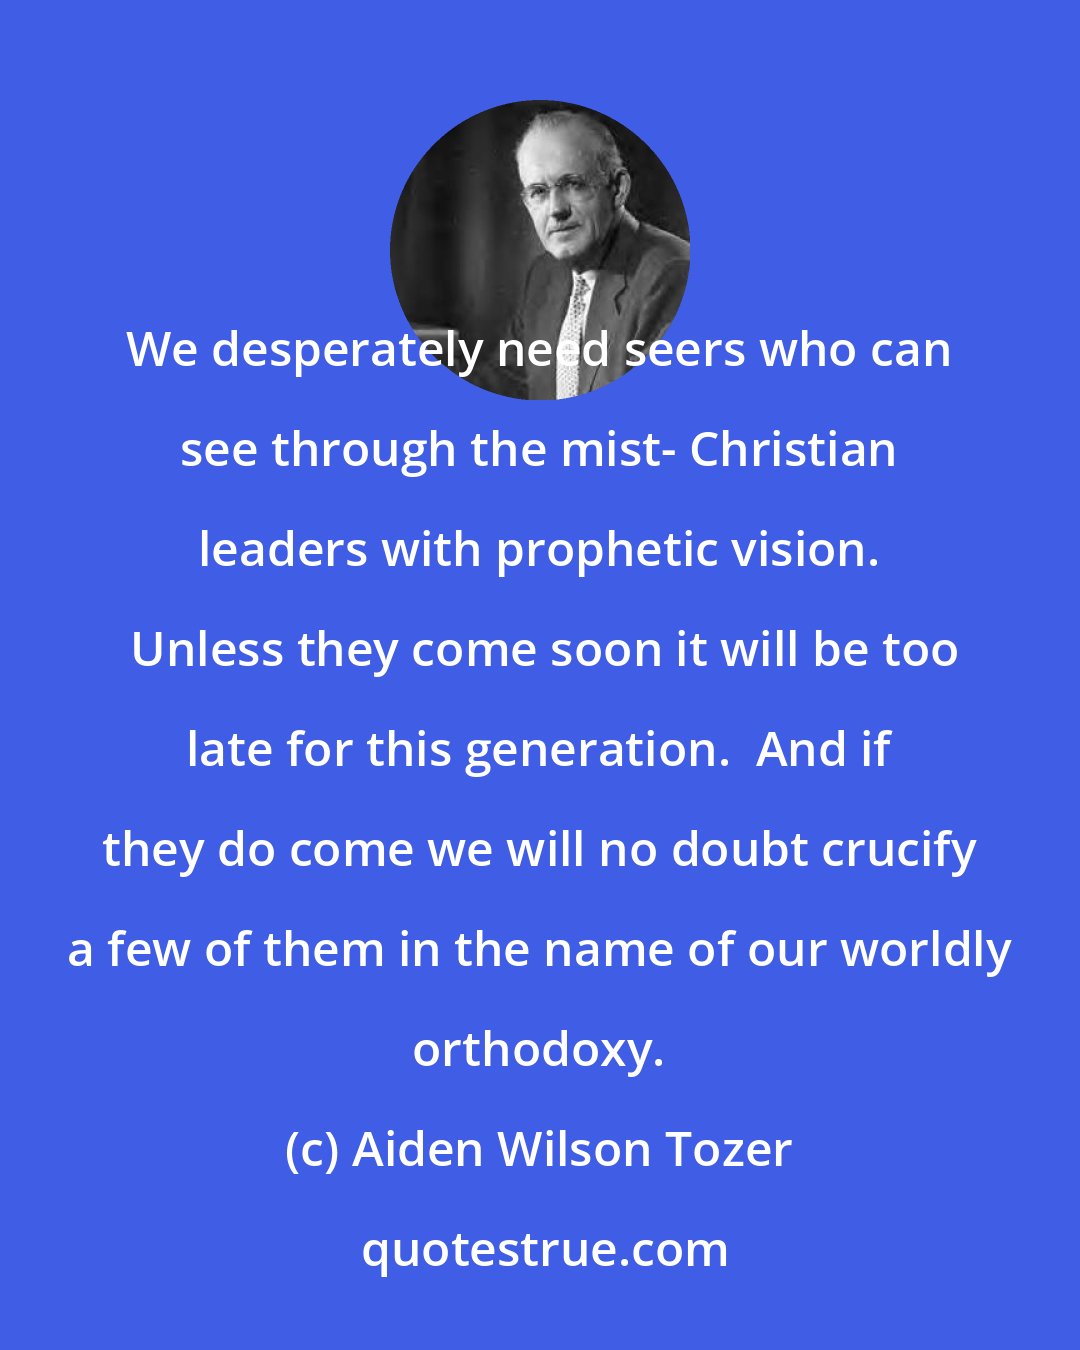 Aiden Wilson Tozer: We desperately need seers who can see through the mist- Christian leaders with prophetic vision.  Unless they come soon it will be too late for this generation.  And if they do come we will no doubt crucify a few of them in the name of our worldly orthodoxy.